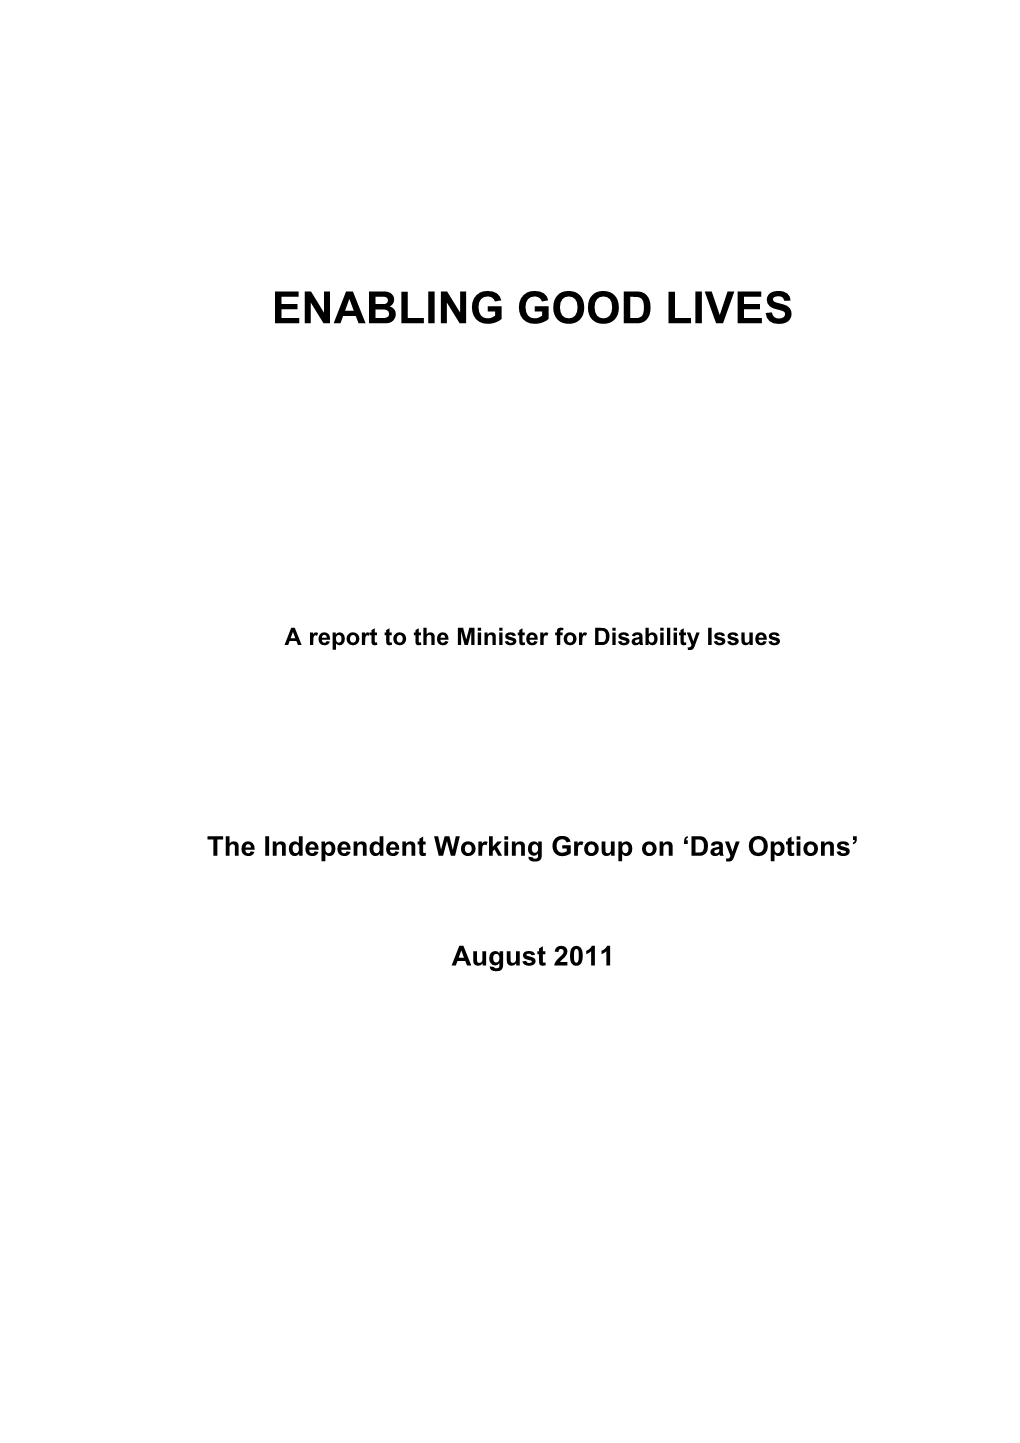 Enabling Good Lives Working Group Report August 2011